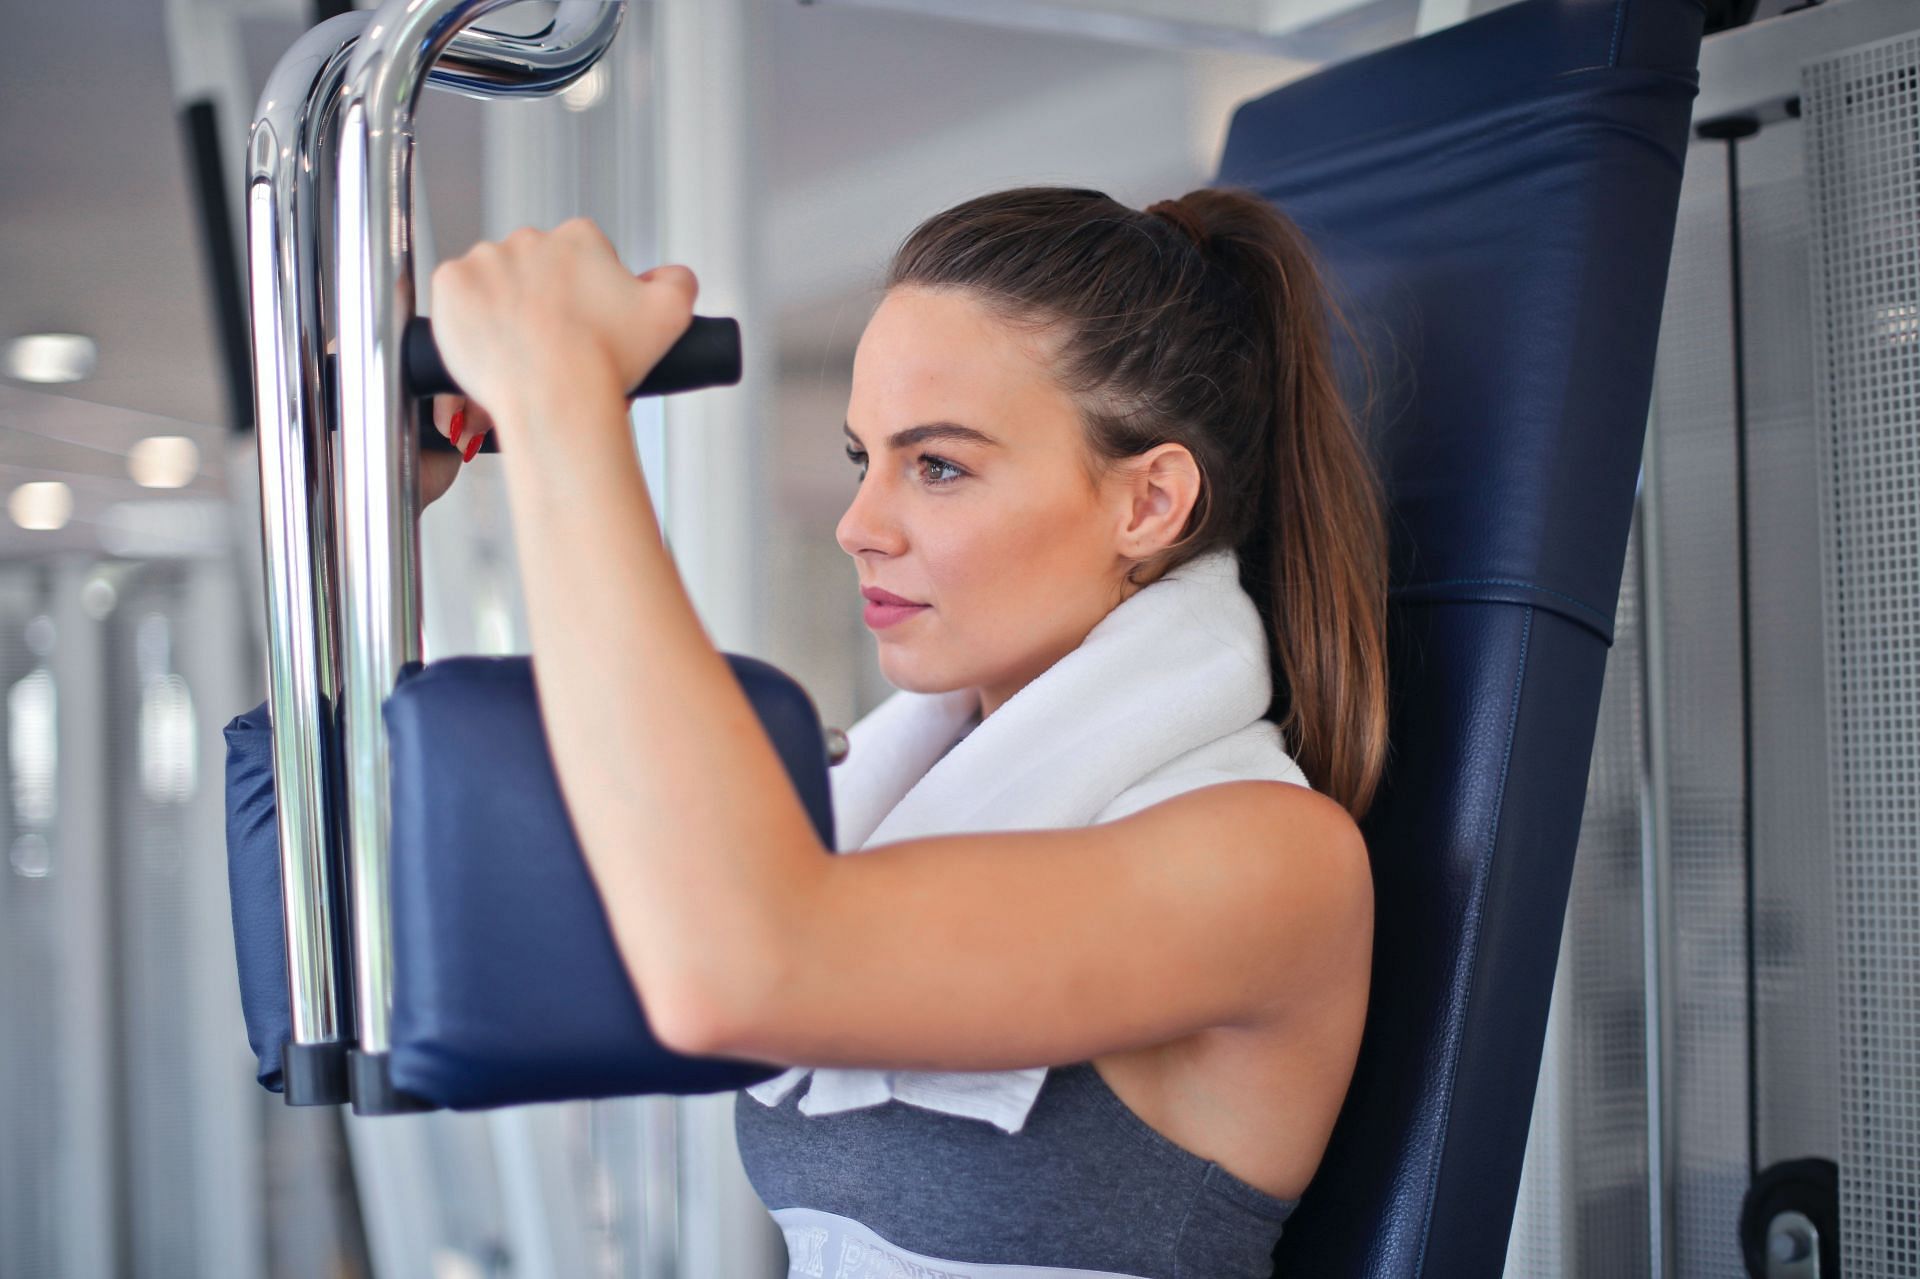 When working out on any of the chest workout machines you push your chest outwards. (Image via Pexels/ Andrea Piacquadio)